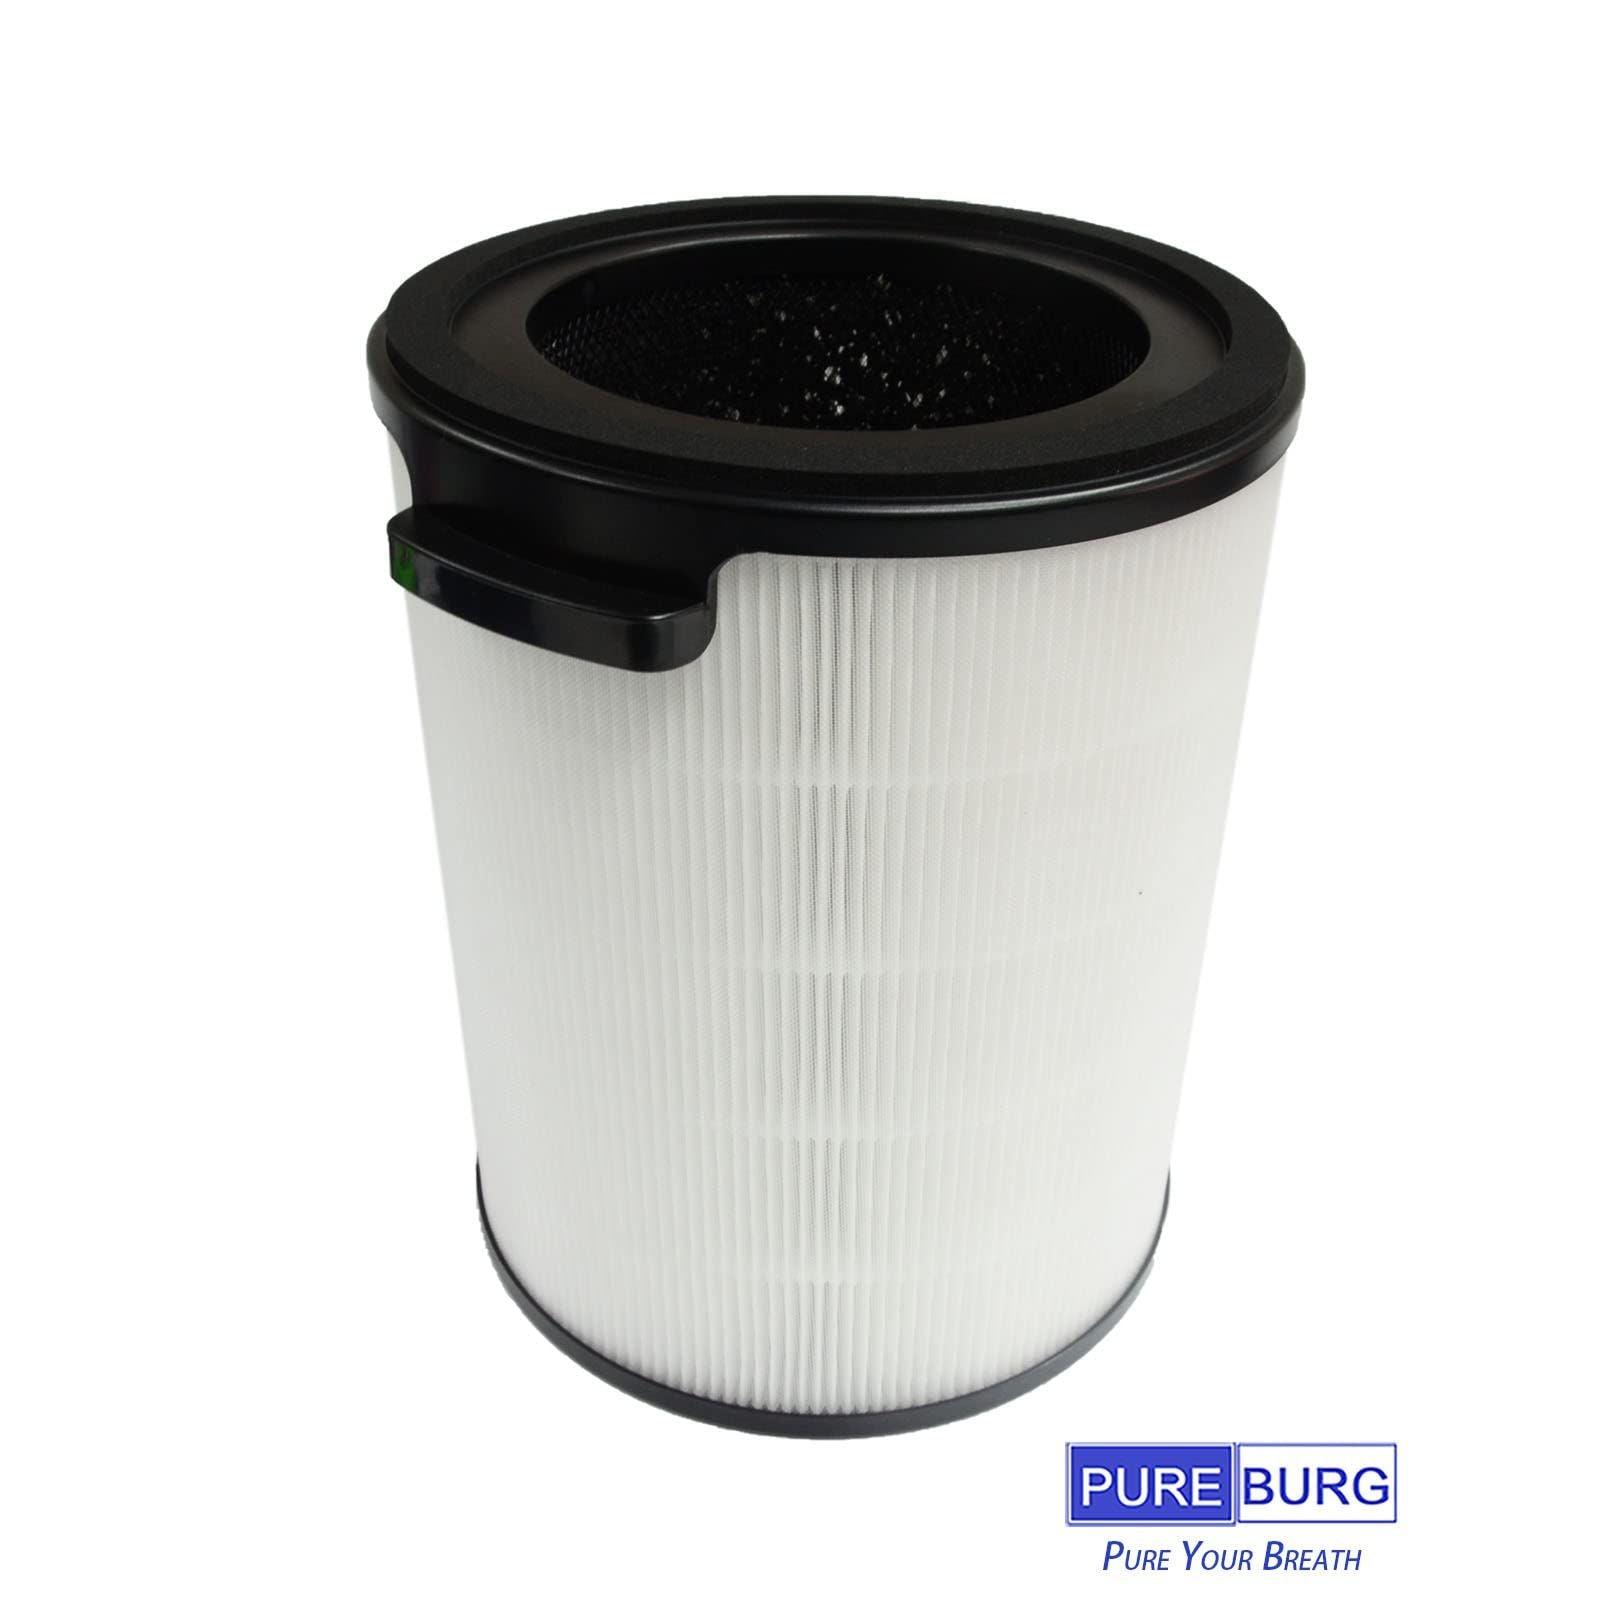 PUREBURG Replacement HEPA Filter Compatible with PHILIPS 2000i Series Air Purifier AC2936/33, Part Number FY2180/30 3